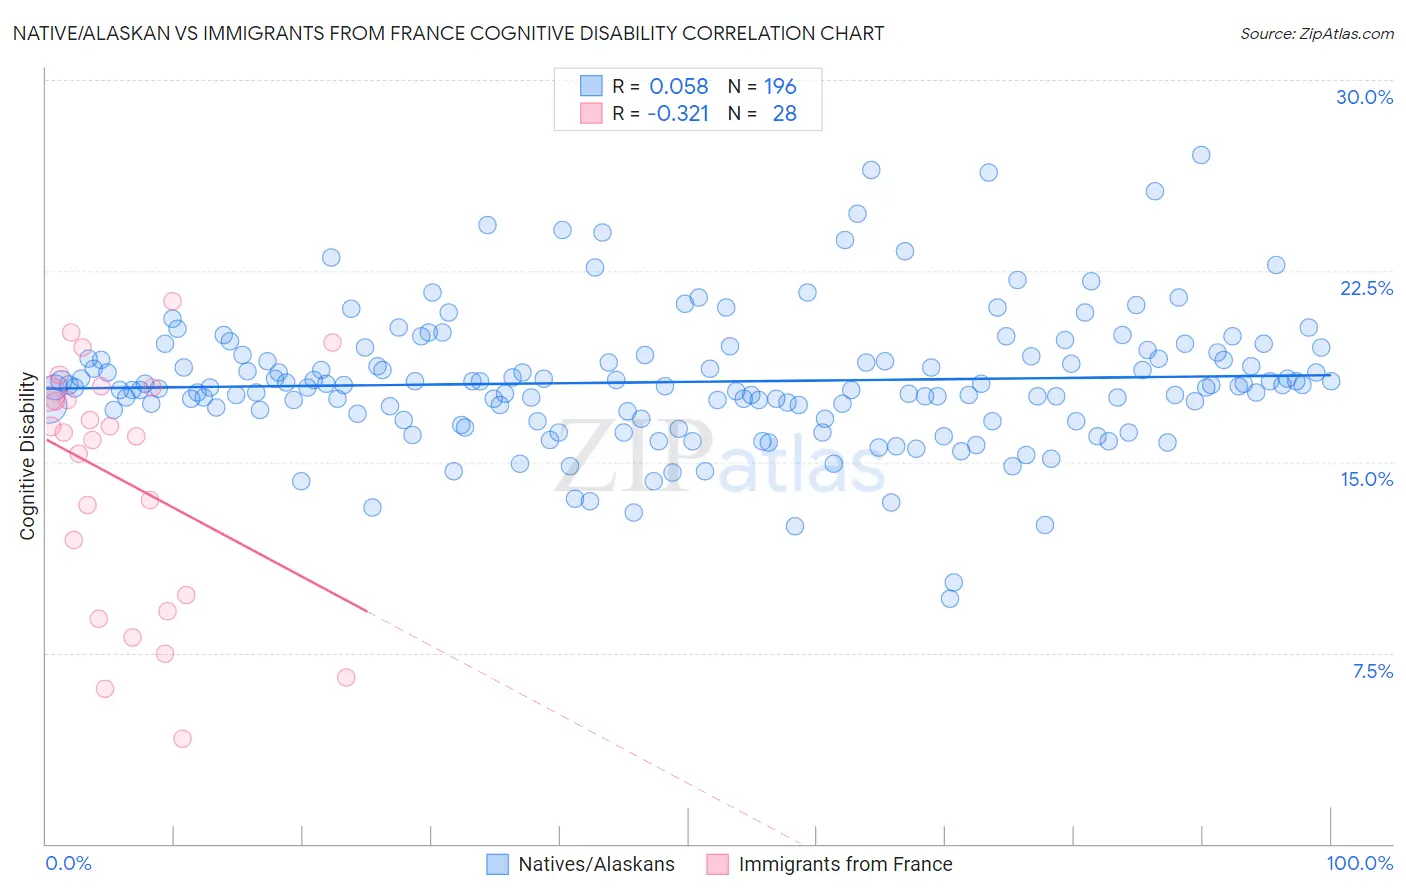 Native/Alaskan vs Immigrants from France Cognitive Disability